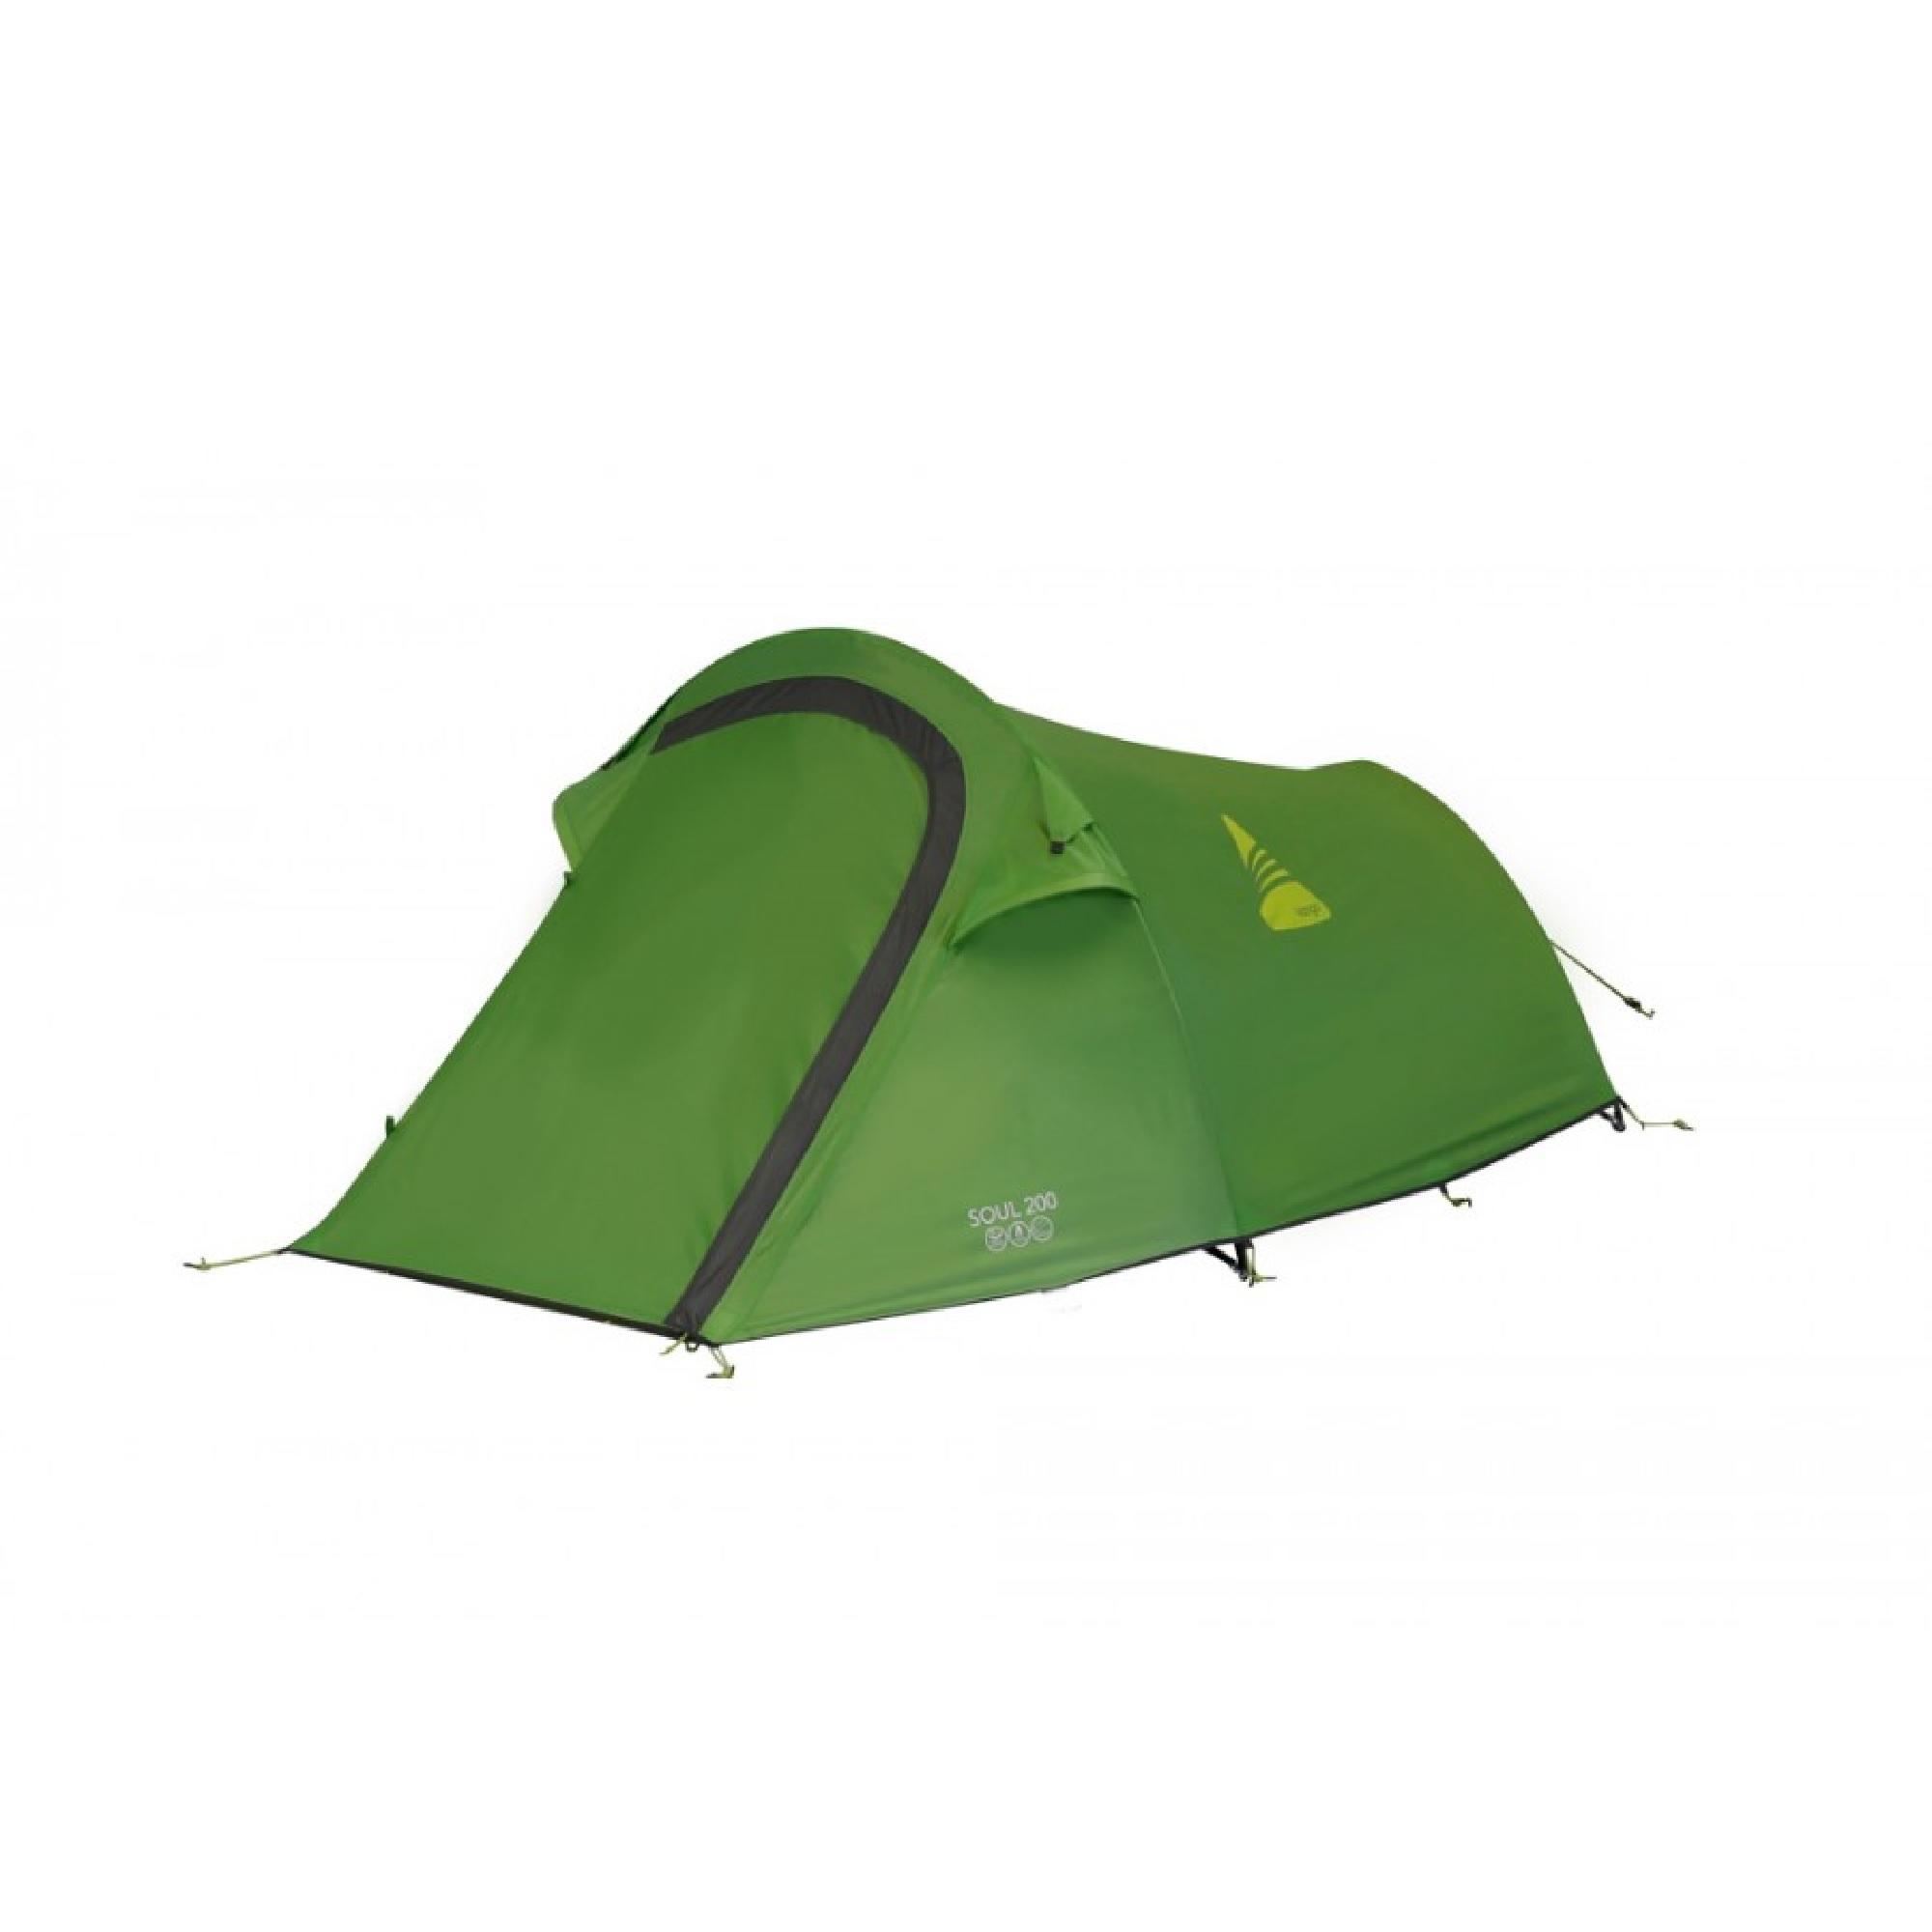 Starter Tent for 2 People 1/3